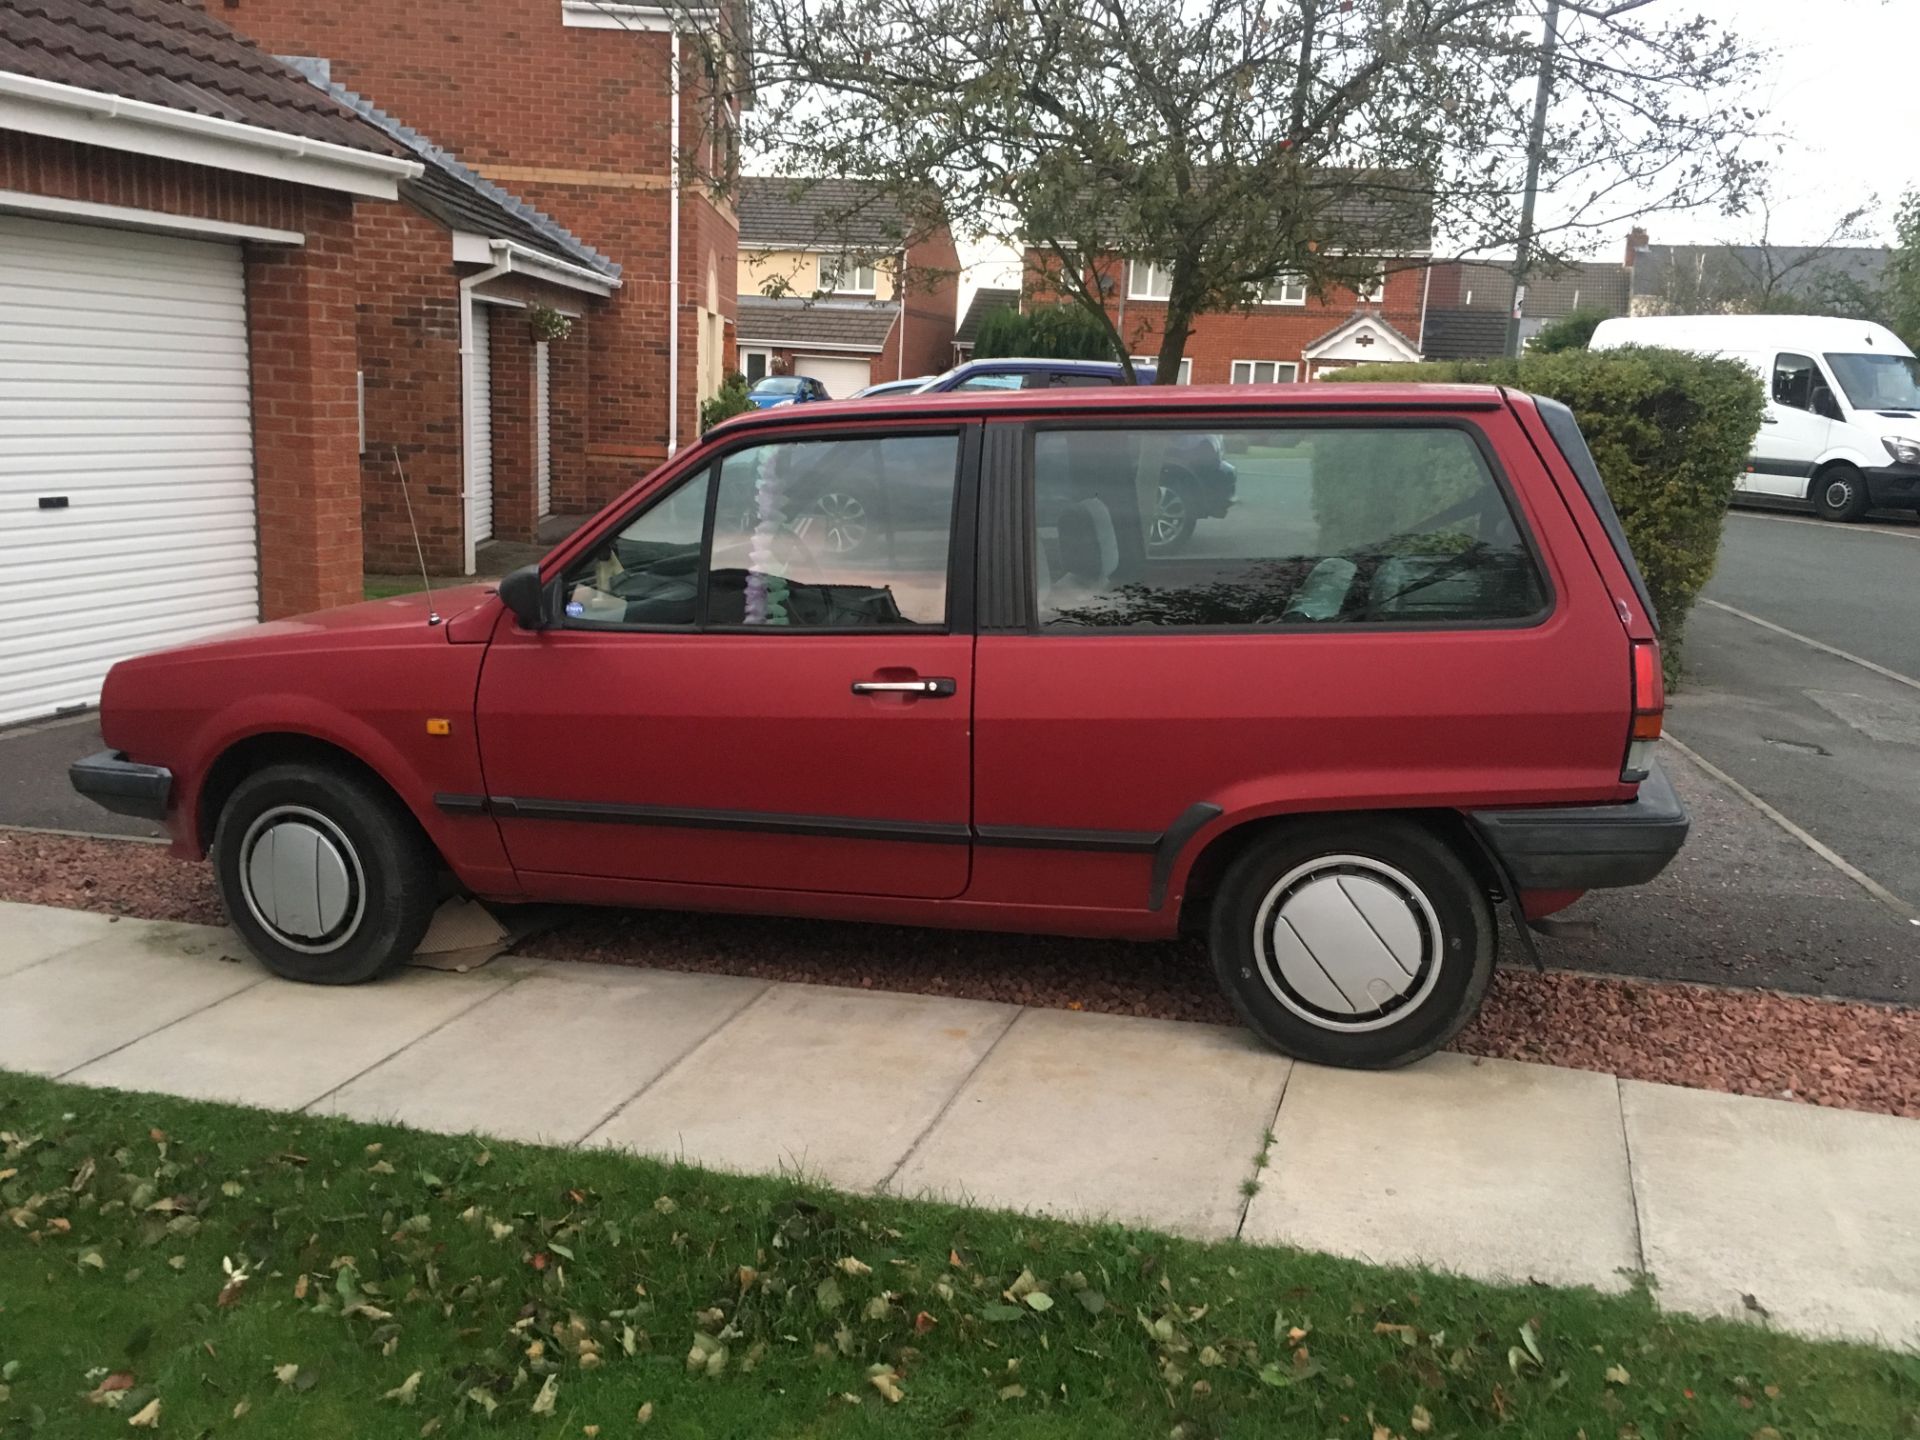 1989 1.0 VW Polo Mk2 Breadvan 81K Miles No Mot  Completely Original From Factory - Image 2 of 15